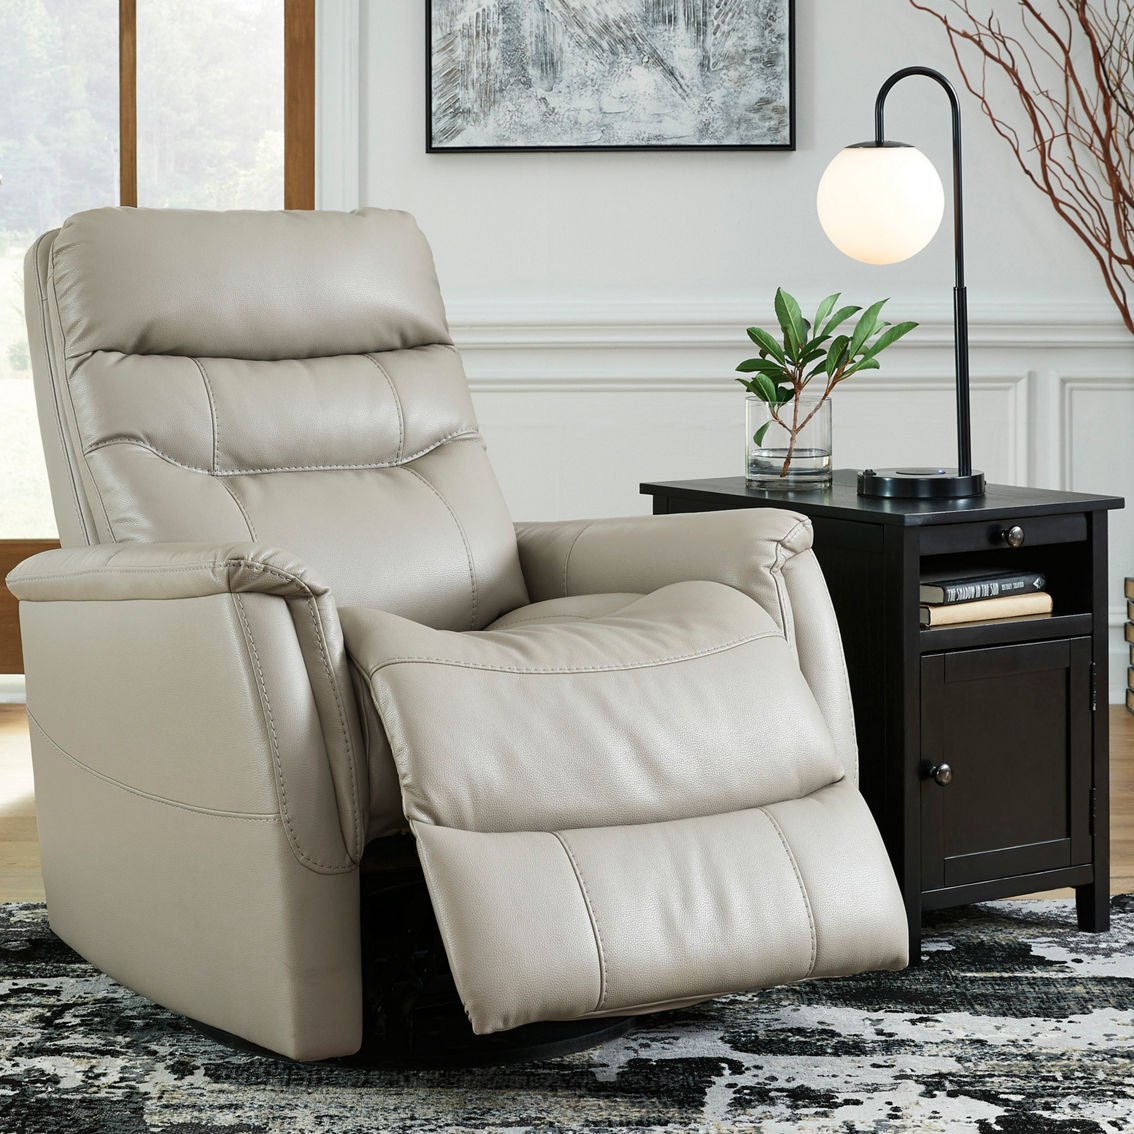 Signature Design by Ashley Riptyme Swivel Glider Recliner - Image 4 of 7